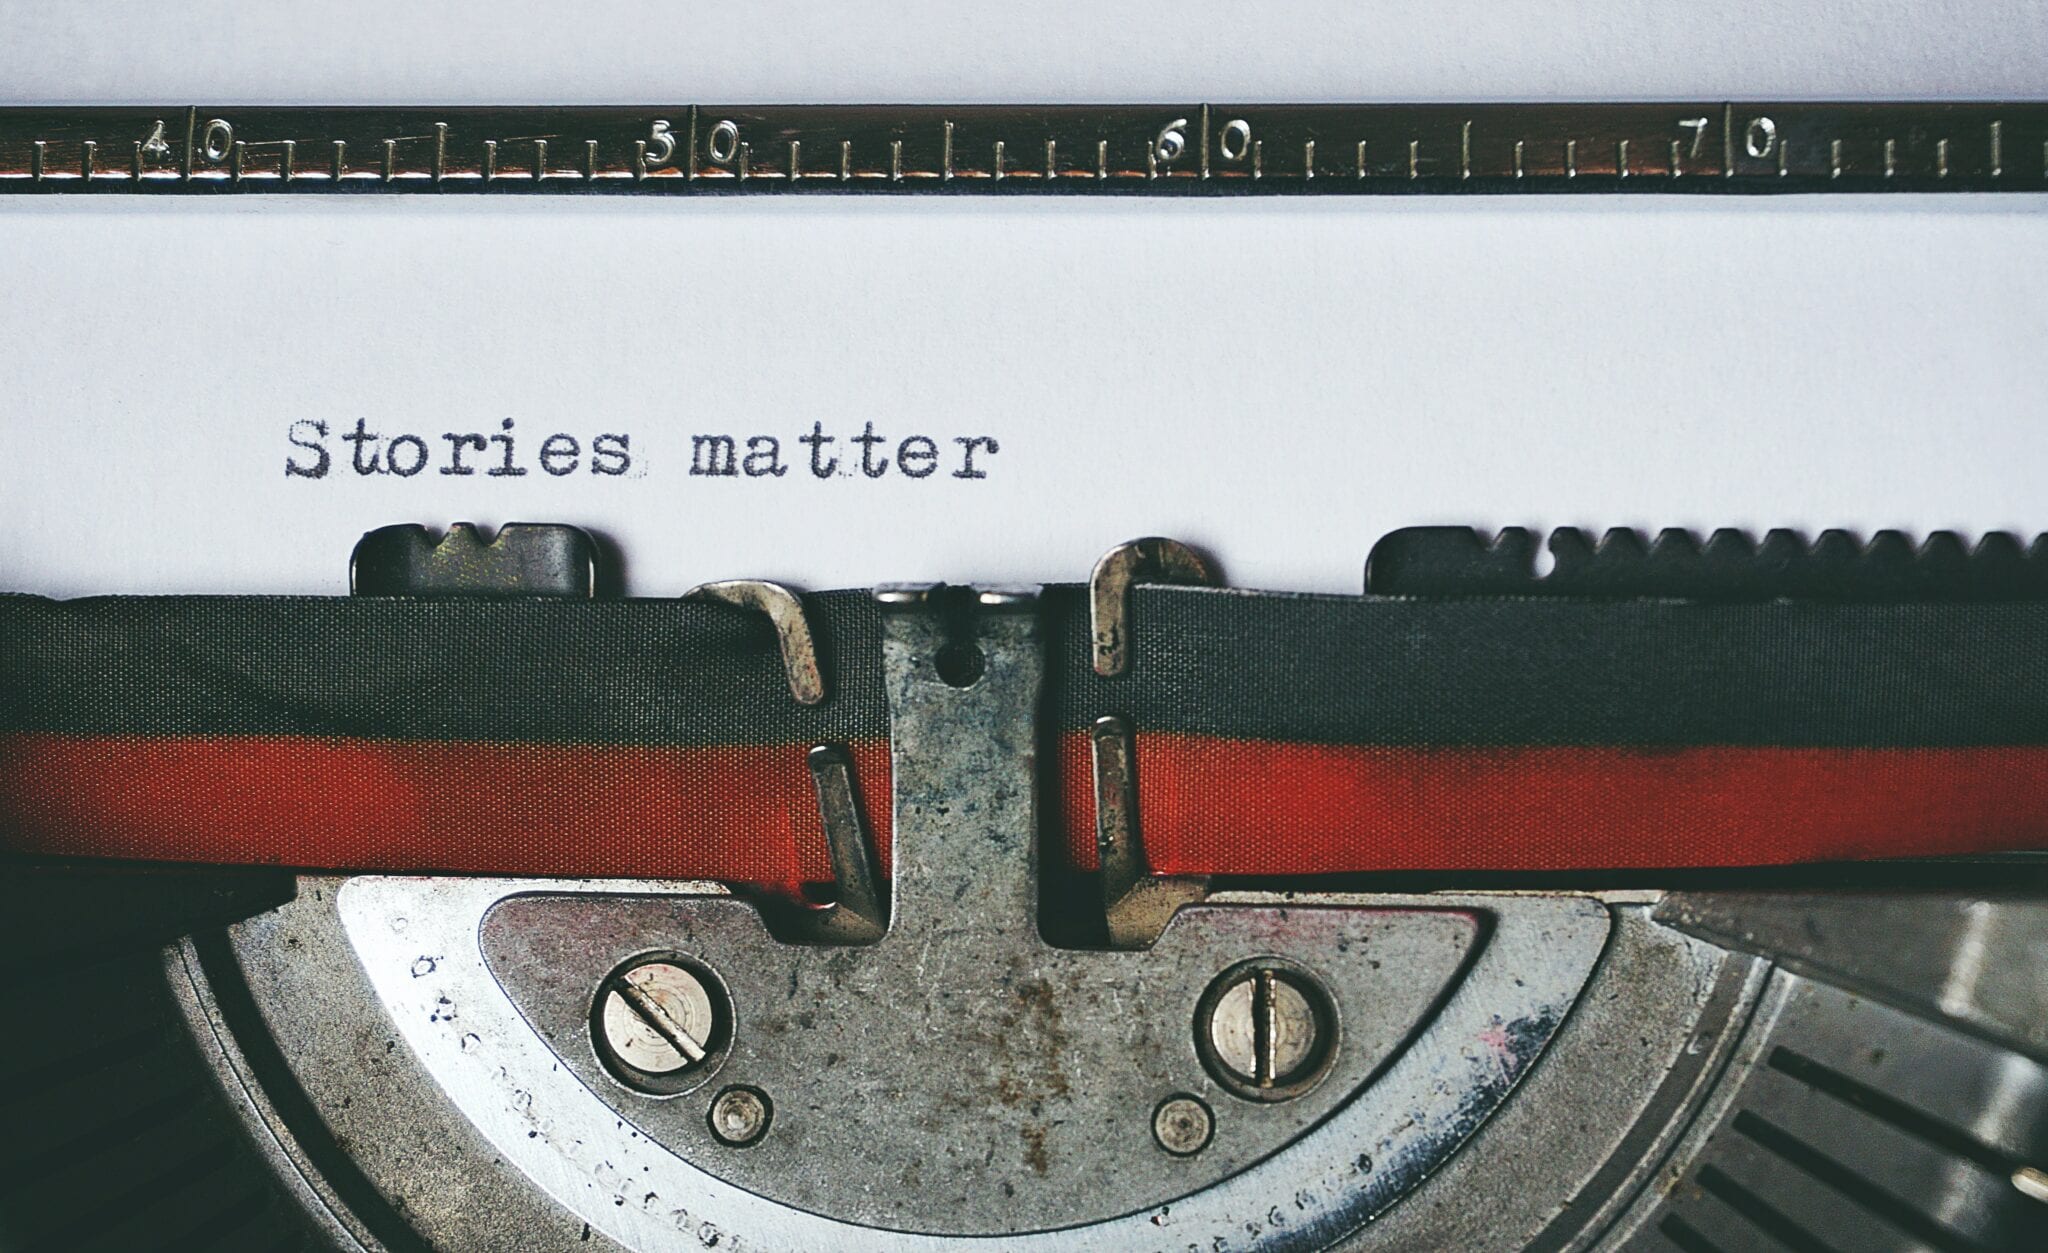 Why are press releases more crucial than ever?